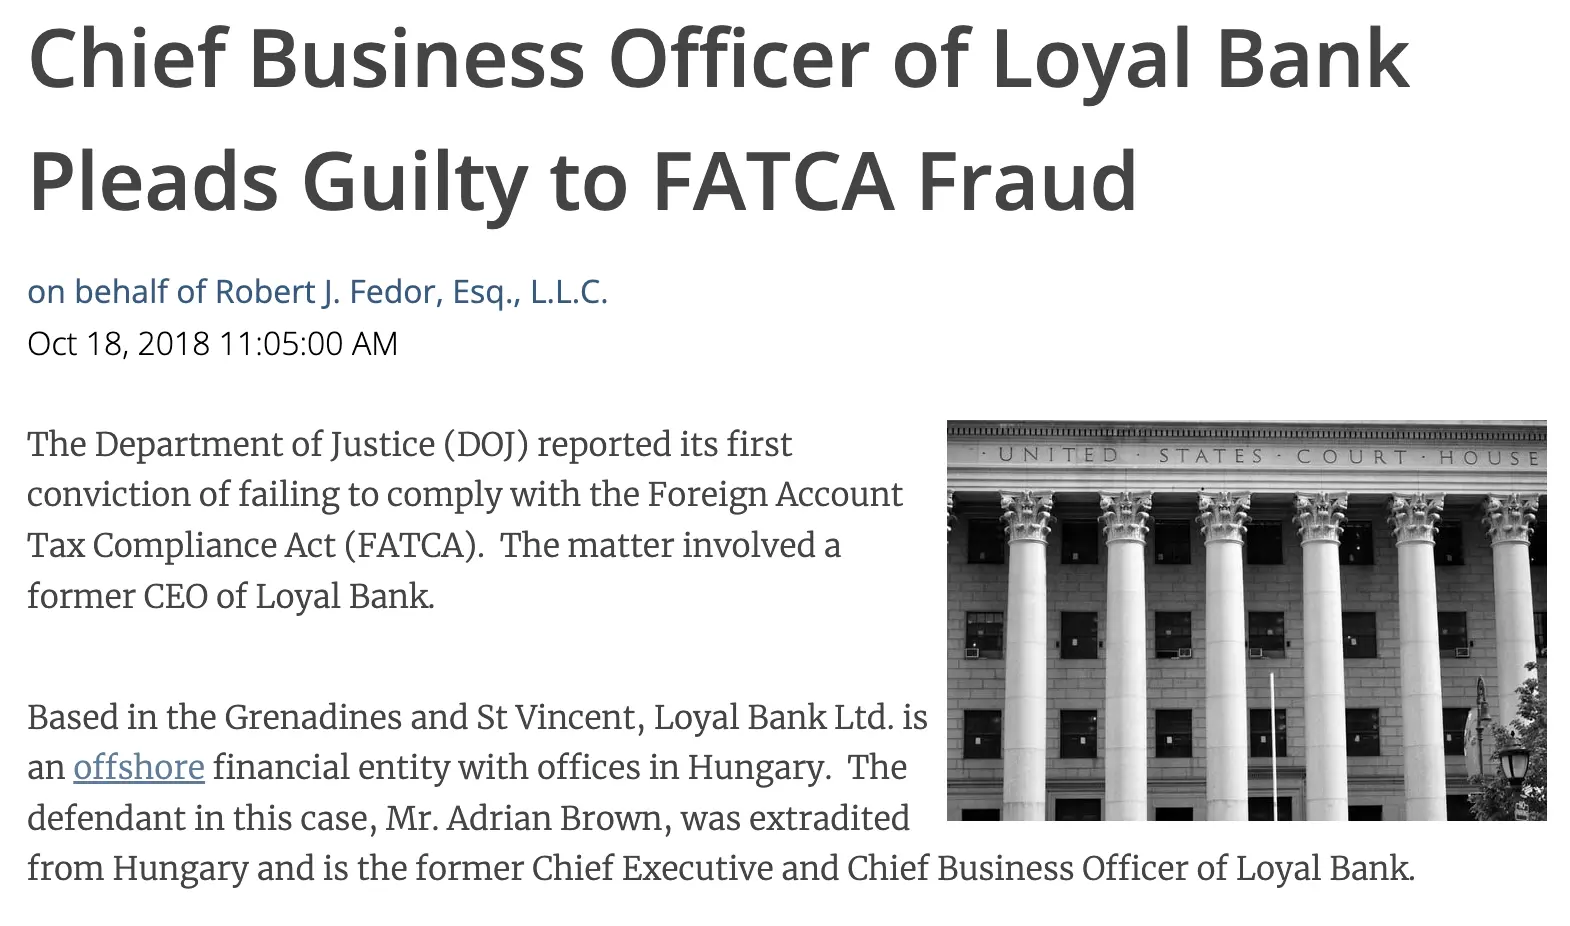 FATCA KYC Conviction. US Internal Revenue Service (IRS). Hungary and St Vincent & Grenadines-based Loyal Bank